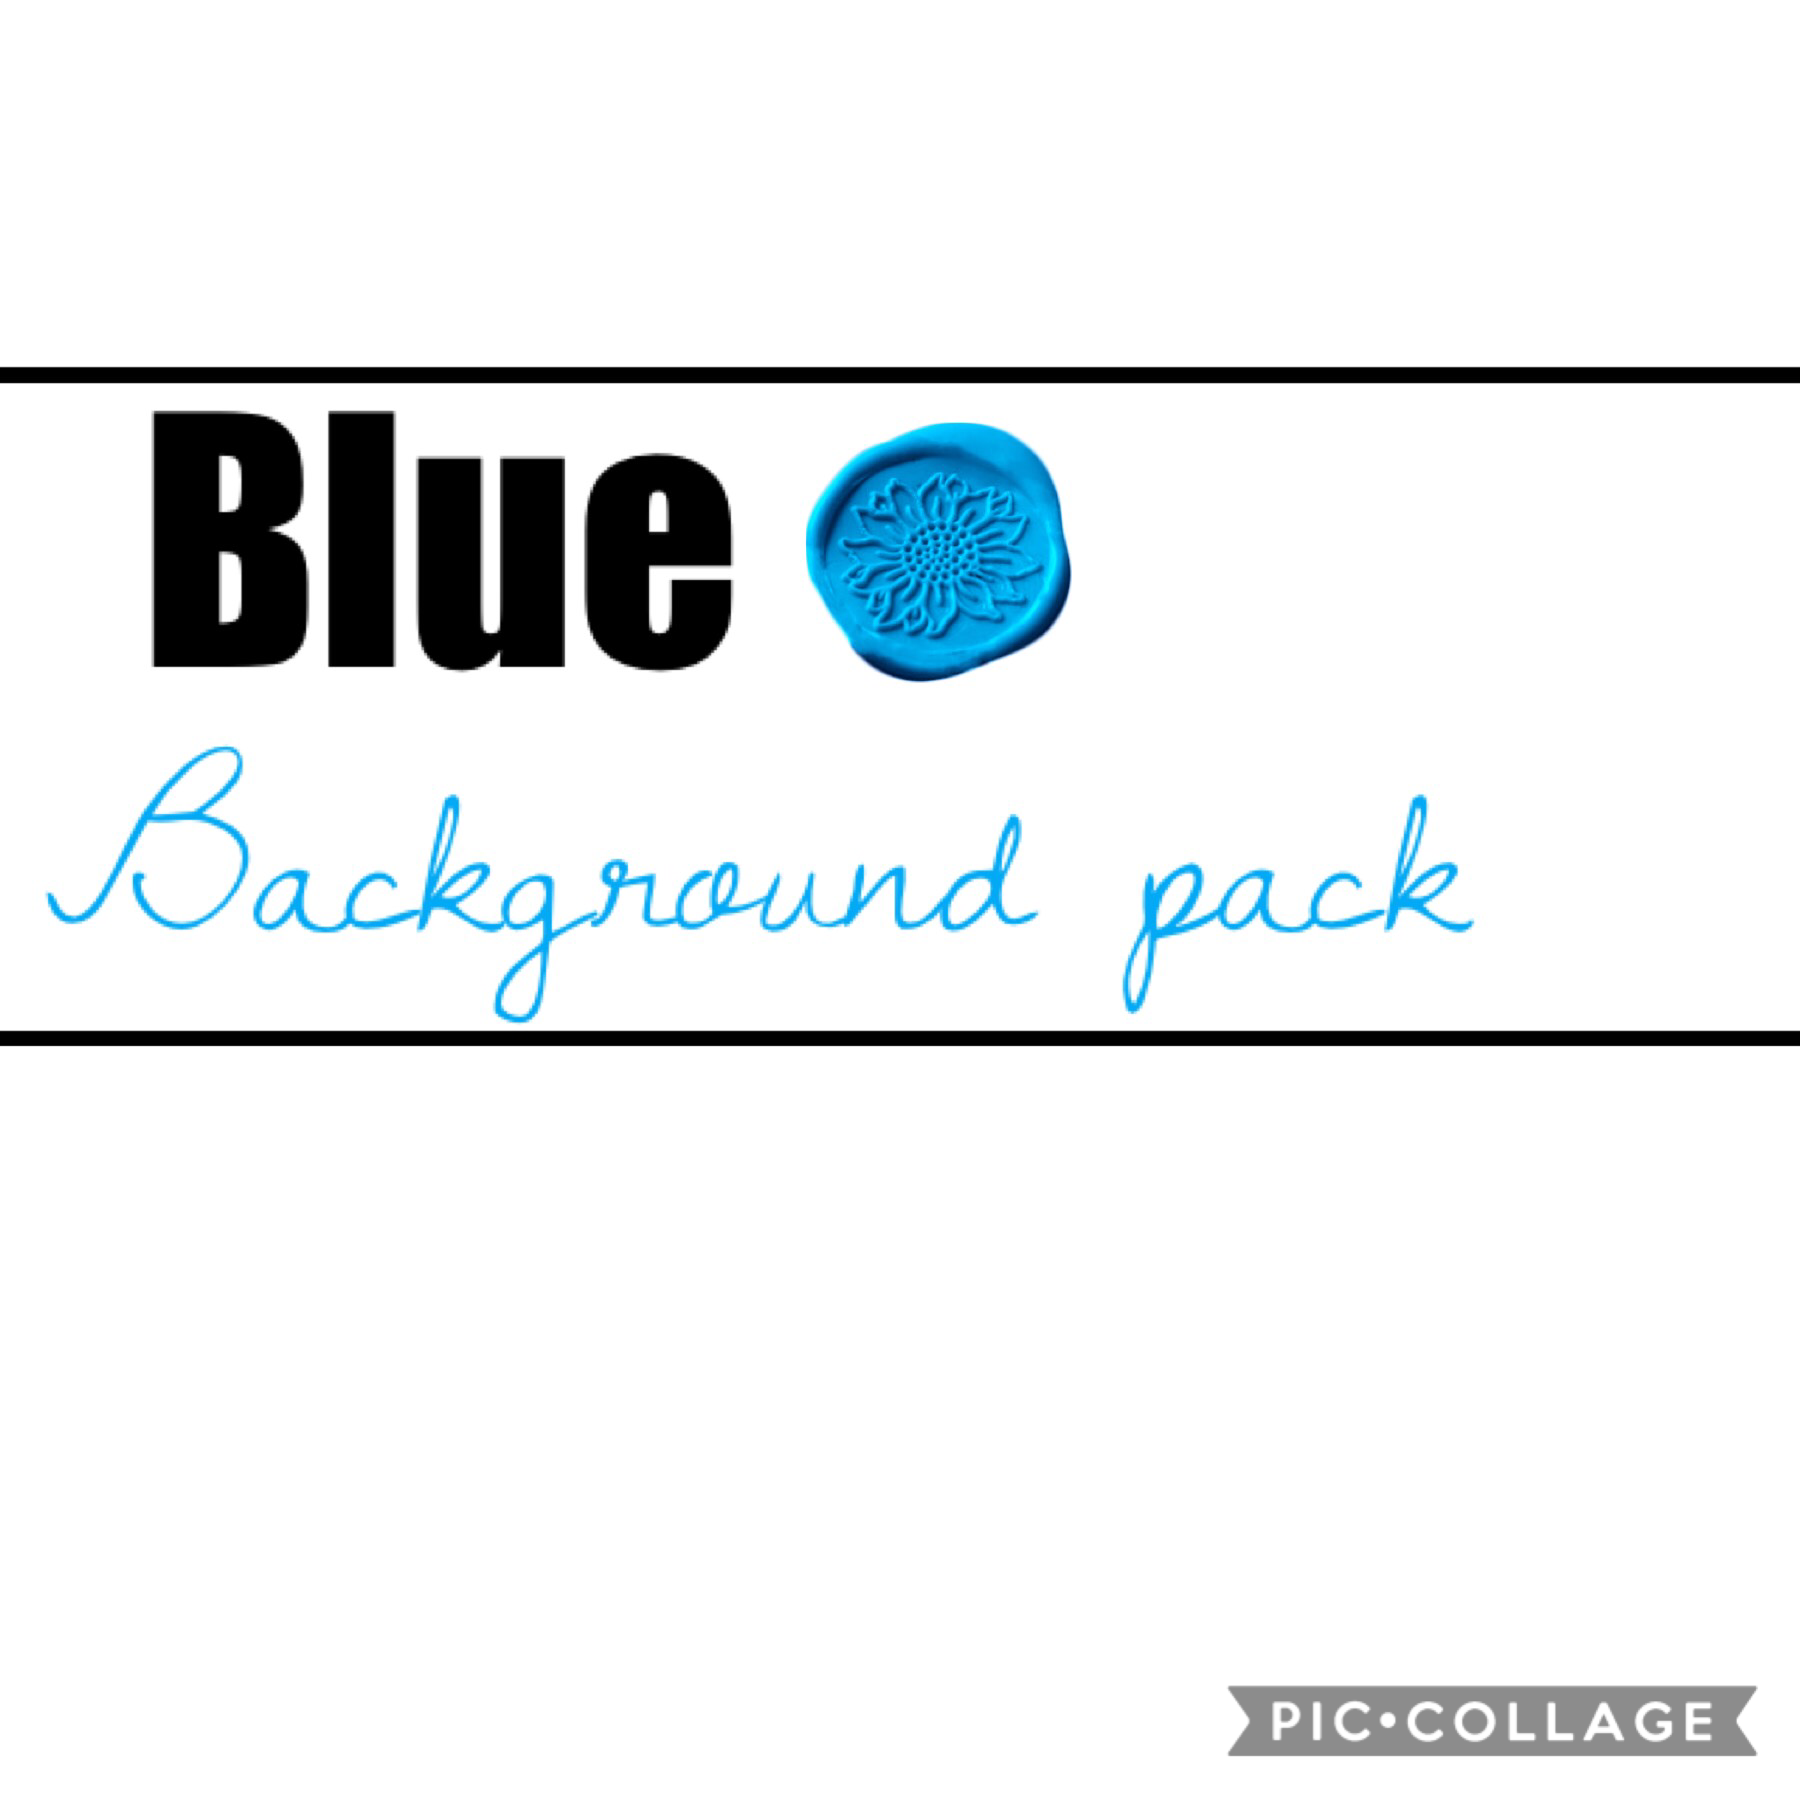 🌊Blue background pack🌊
💙Please give credit 💙